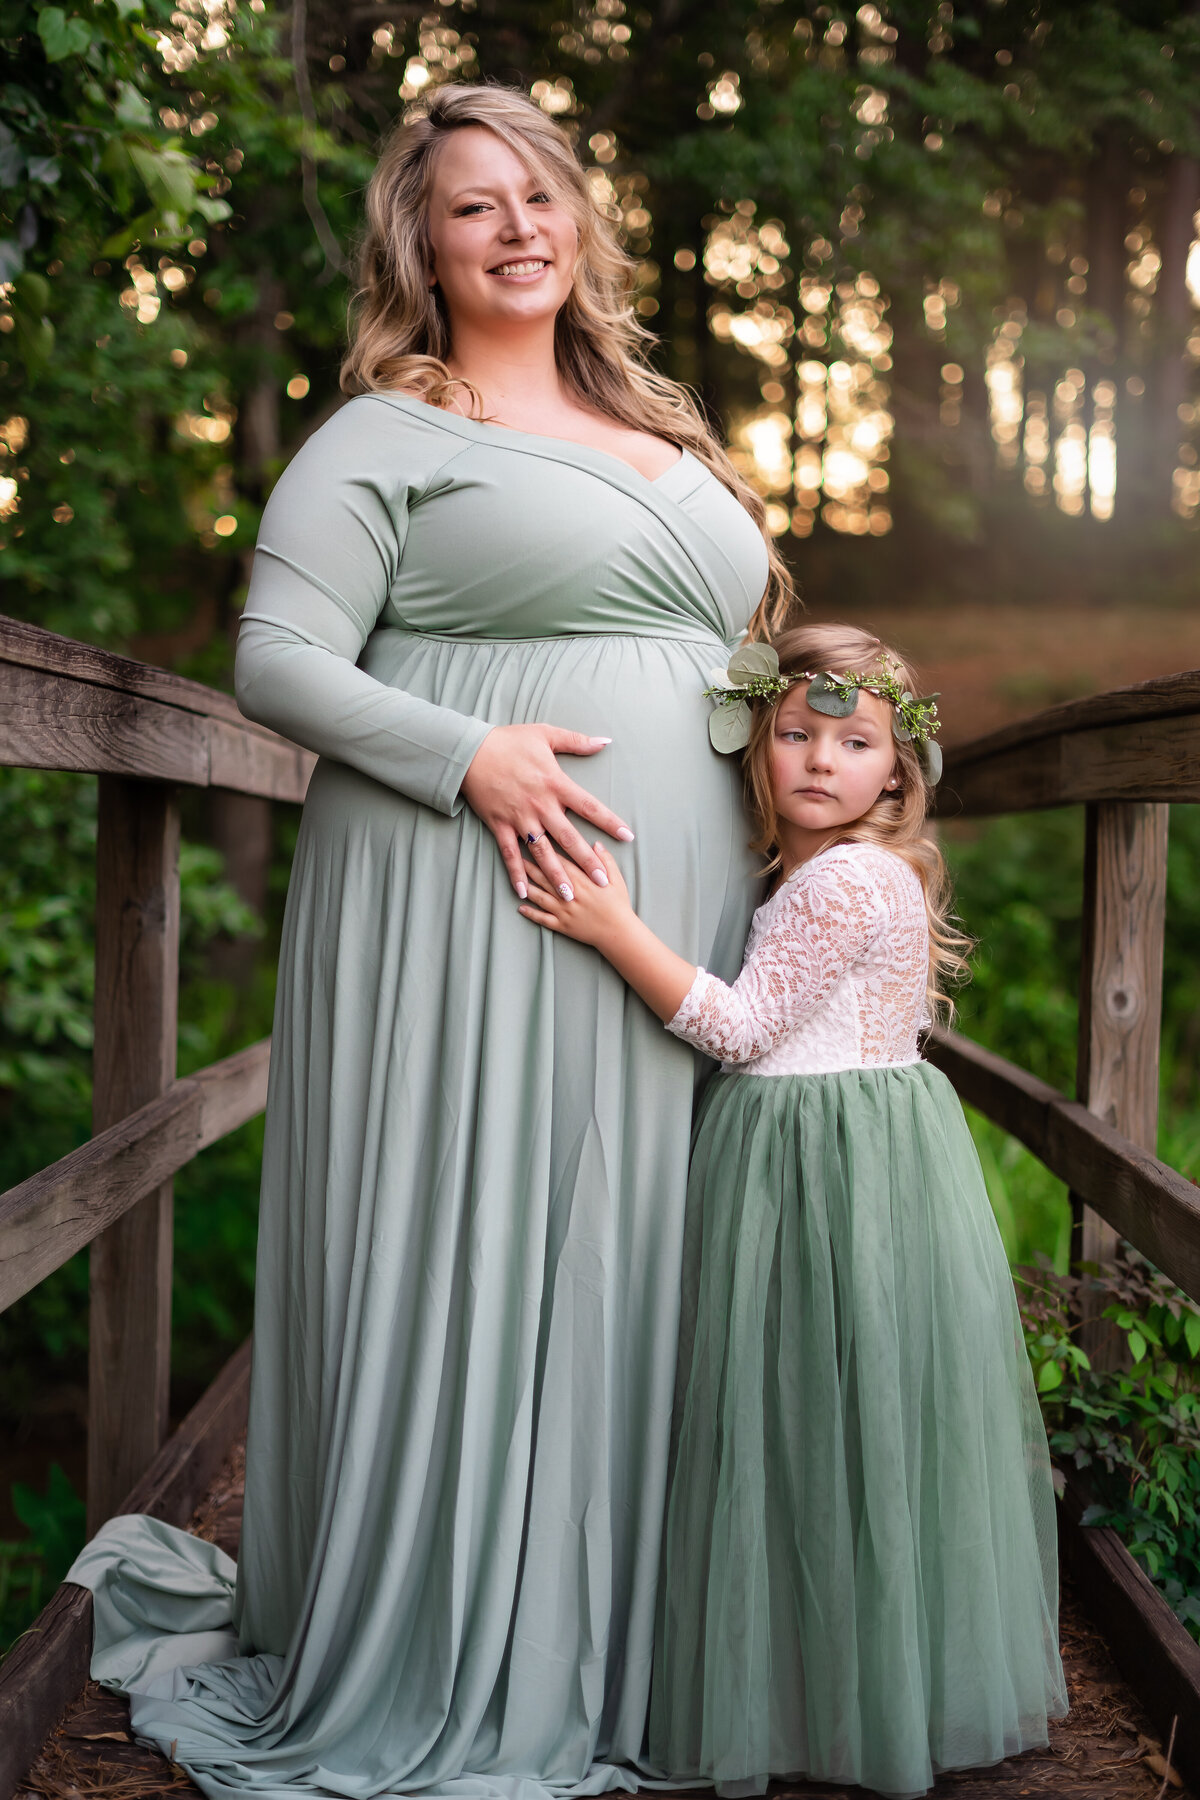 Mother and daughter snuggling maternity pose